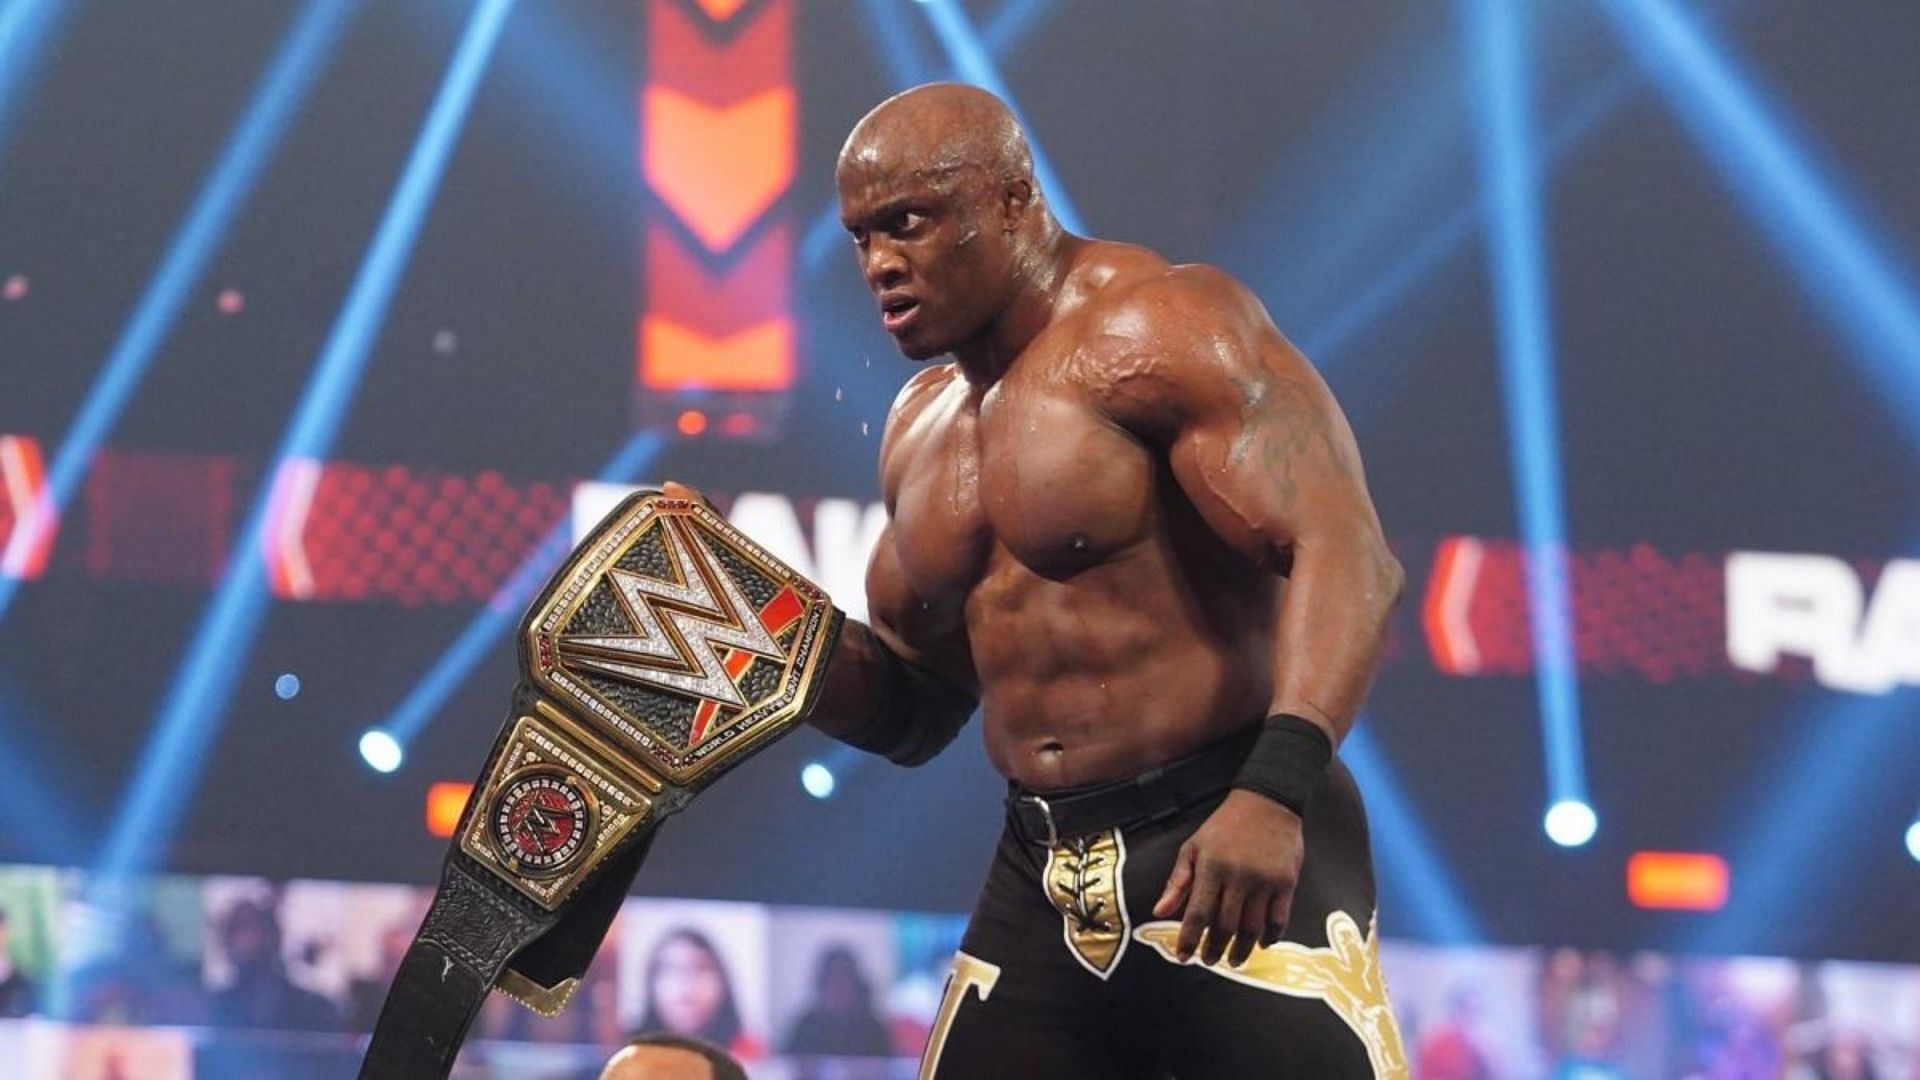 Bobby Lashley says the WWE Title is on the same level as the Universal Championship.